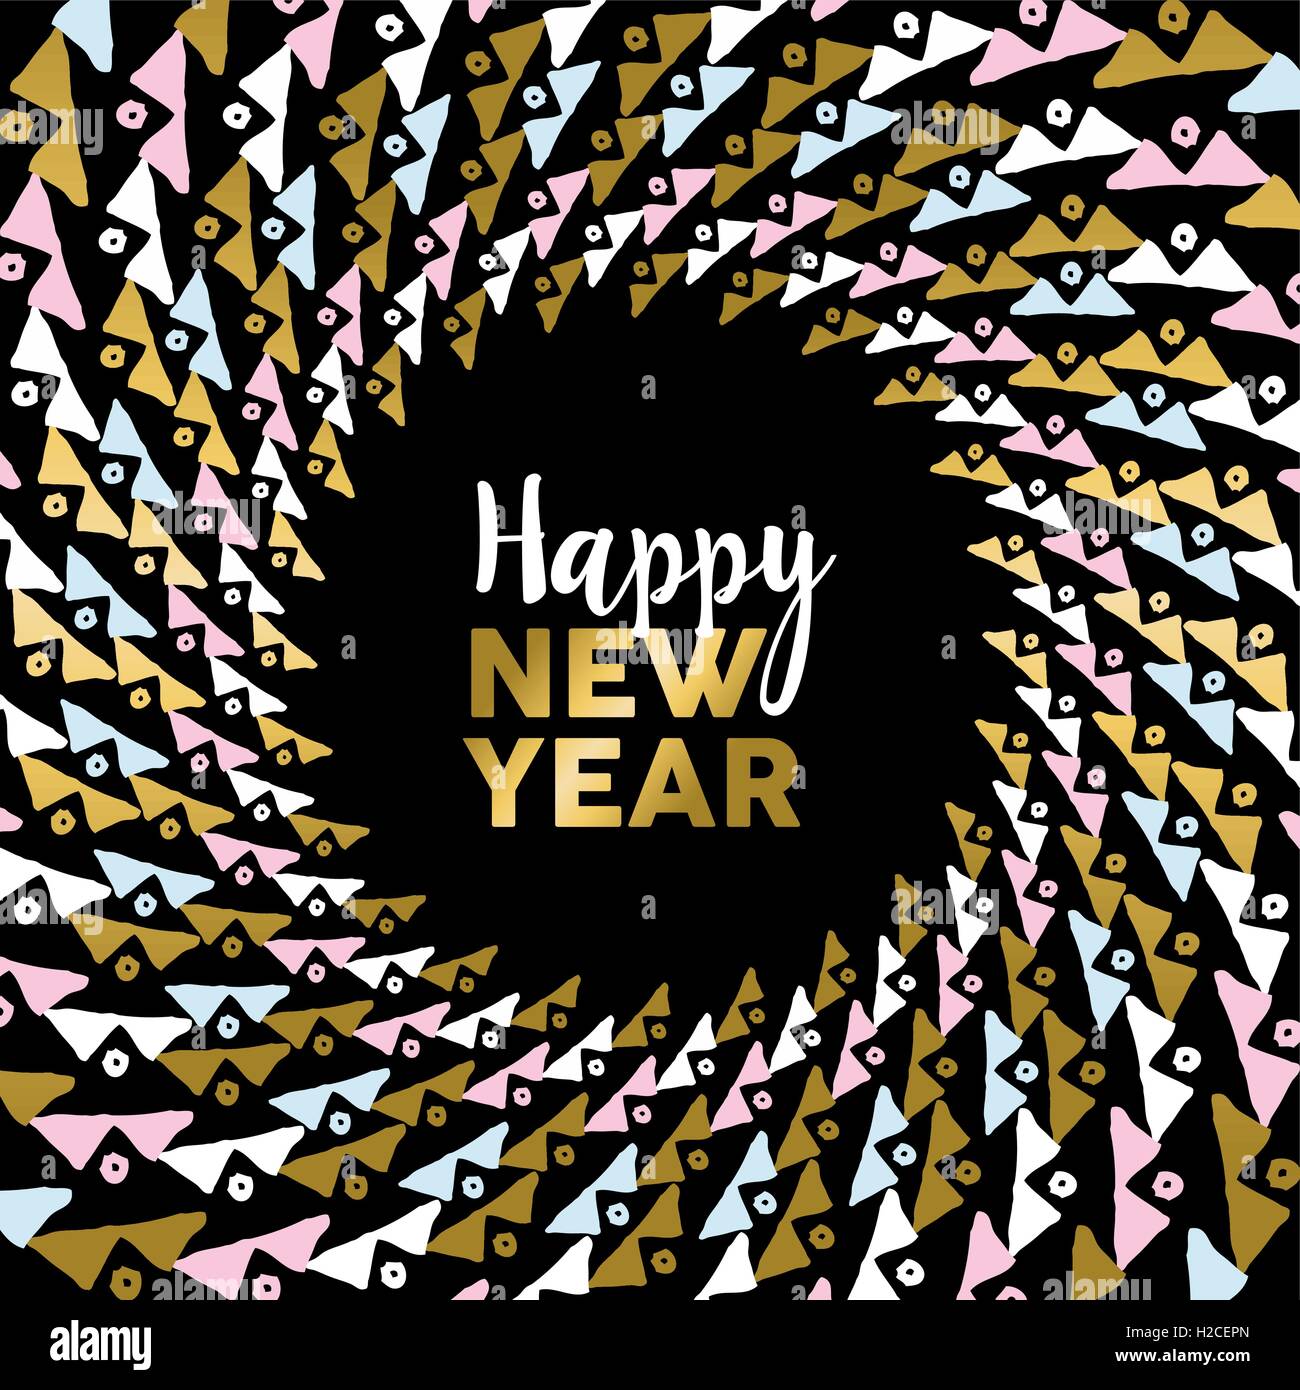 Happy New Year holiday design in gold color with hand drawn tribal mandala art. EPS10 vector. Stock Vector